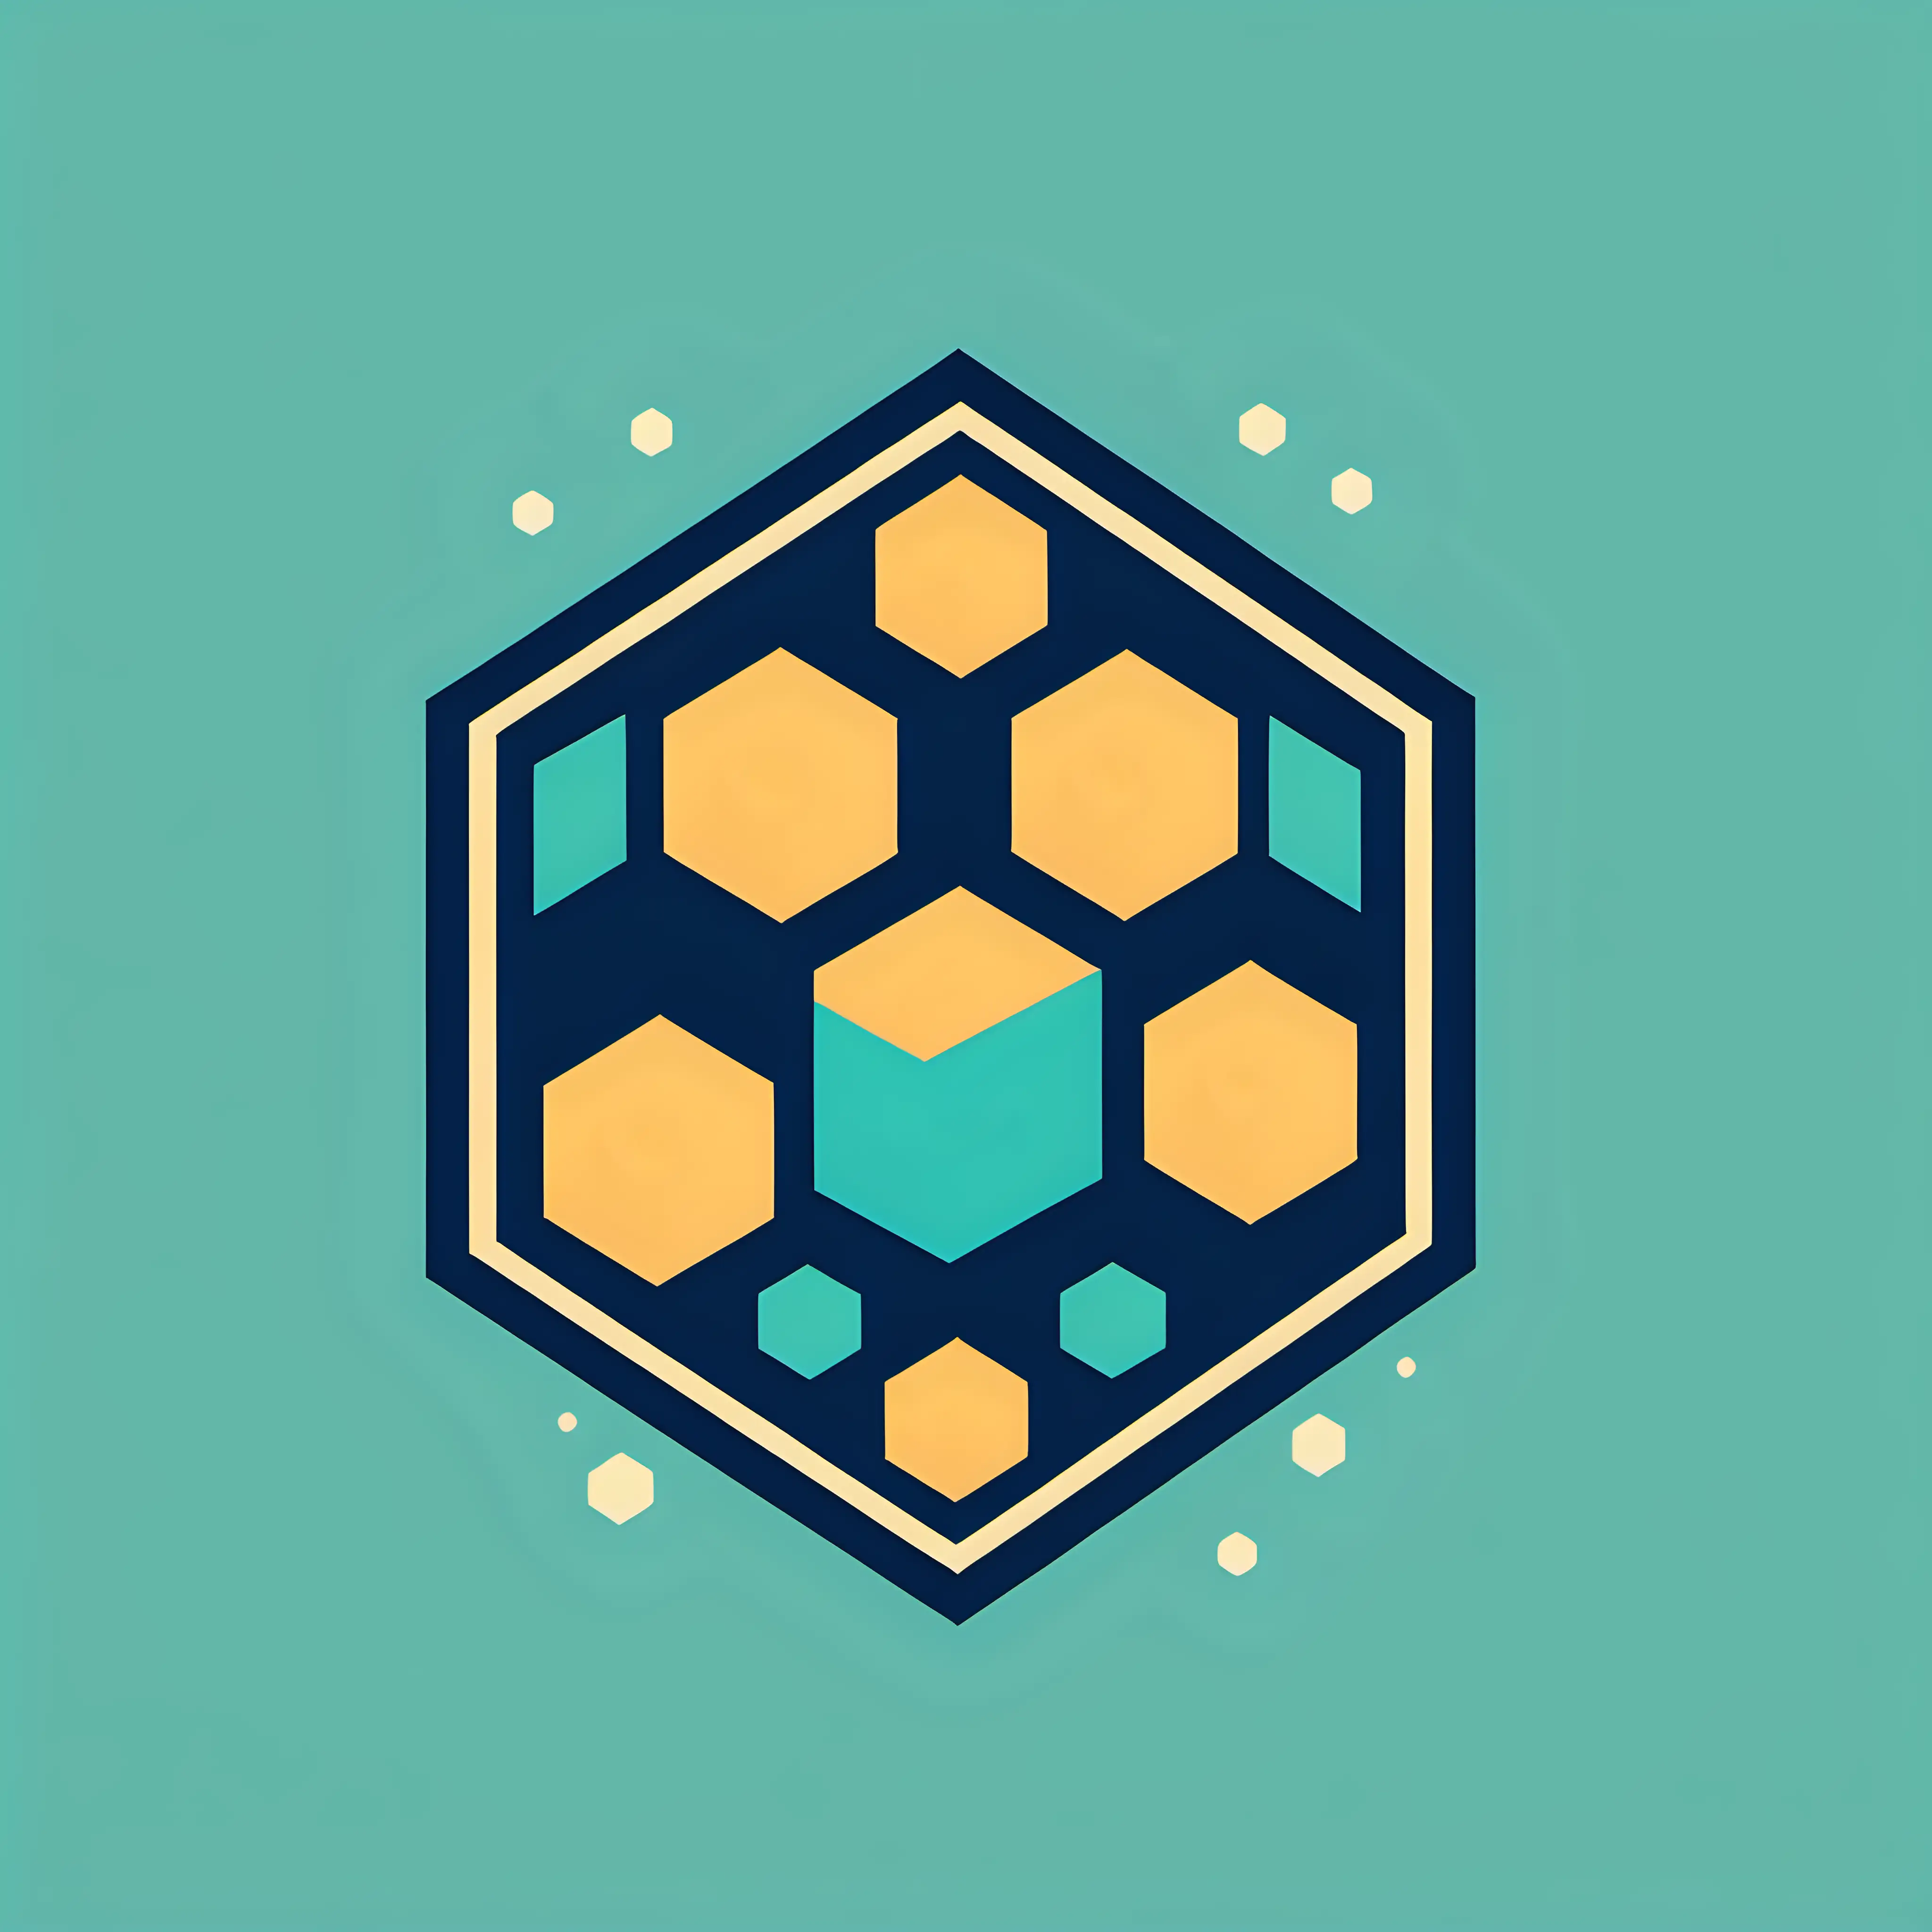 Modern Geometric Brand Logo Design in Two Colors Honeycomb Inspiration